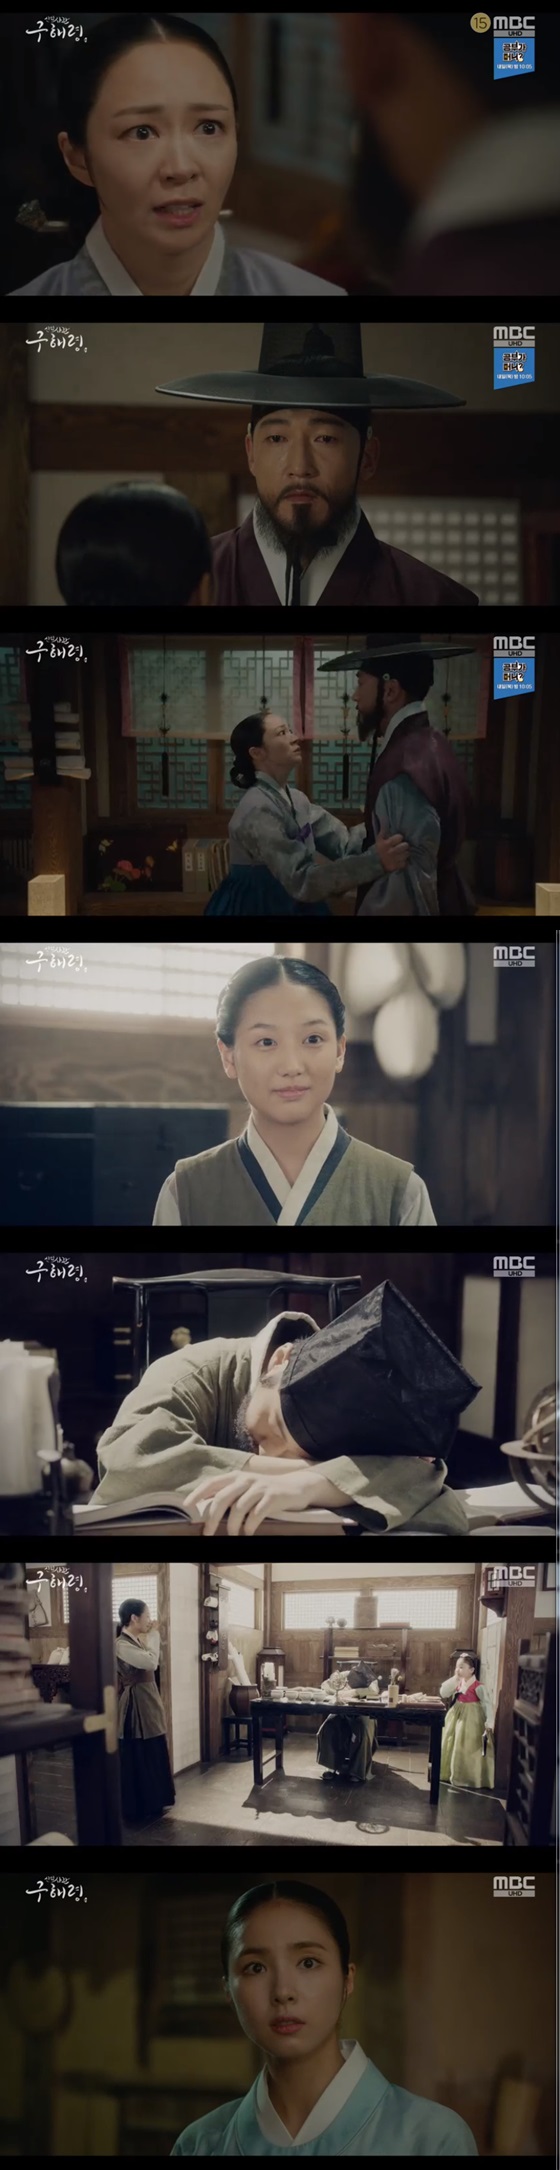 When will Shin Se-kyung know his hidden family history?Over the middle of the year, New Entrance Rookie Historian Goo Hae-ryung tried to change the atmosphere with new content development.MBCs drama The New Entrepreneur Rookie Historian Goo Hae-ryung (played by Kim Ho-soo, directed by Kang Il-soo and Han Hyun-hee, produced by Green Snake Media) was broadcast on the afternoon of the 28th, with the questionable woman Mohwa (Jeon Ye-seo) with Mrs. Rookie Historian Goo Hae-ryung (Shin Se-kyung) The ending was made with a scene of reuniting and being surprised.On the day of the show, the story of the identity of the questioning Foreign in the palace was drawn. The people who saw Foreign in the garden of Donggungjeon were embarrassed by the Westerners who first saw it.He came from the Yalu River, a Frenchman who had almost been taken to the bank, but he fled away from the bank.Lee Rim (Cha Eun-woo), Rookie Historian Goo Hae-ryung, and Heo Sam-bo (Seongji-ru) filled Foreigns Jurin ship and asked why he came to Joseon.Hanyang was scammed by Kim, Foreign said.With everyone believing in him, Rookie Historian Goo Hae-ryung only doubted.Rookie Historian Goo Hae-ryung called Irim and said, Mama believes all of his words, something is strange.Kim Seo-bang, a new bookstore, is not a person to go to the Qing Dynasty and buy it. Rookie Historian Goo Hae-ryung added: Its also heartbreaking to be fluent in our language, how can we speak our language?It would be really difficult for Foreign to speak Korean, he said. I think he studied Korean on purpose.Foreigns identity was revealed as Catholic. There was already a Catholic who helped him.Min Ik-pyeong (Choi Deok-moon) was convinced of Foreign that he was coming to spread Catholicism. In fact, Foreign was brought by Dae-han Lim (Kim Yeo-jin).I am in trouble now, but if I talk about Seoraewon, I will not be standing still, he said. If you find it, you will take care of it.You should never hand him over to the hands of the left-hander, either alive or dead, he said.Mohwa visited Koo Jae-kyung (played by Kong Jeong-hwan) of Rookie Historian Goo Hae-ryung, who said, When did you have a sister?My father died before he was born, and only one sick mother was a family. Rookie Historian Goo Hae-ryung is not your brother, she said, and what the hell are you thinking...why are you? How are you?So, Koo Jae-kyung said with a sad look, Please pretend not to know.The mother-of-one facing Rookie Historian Goo Hae-ryung outside the door was in tears.As Mohwa recalls the young Rookie Historian Goo Hae-ryung in his past, he wonders how Rookie Historian Goo Hae-ryung will react to knowing that Koo Jae-kyung is not his brother.